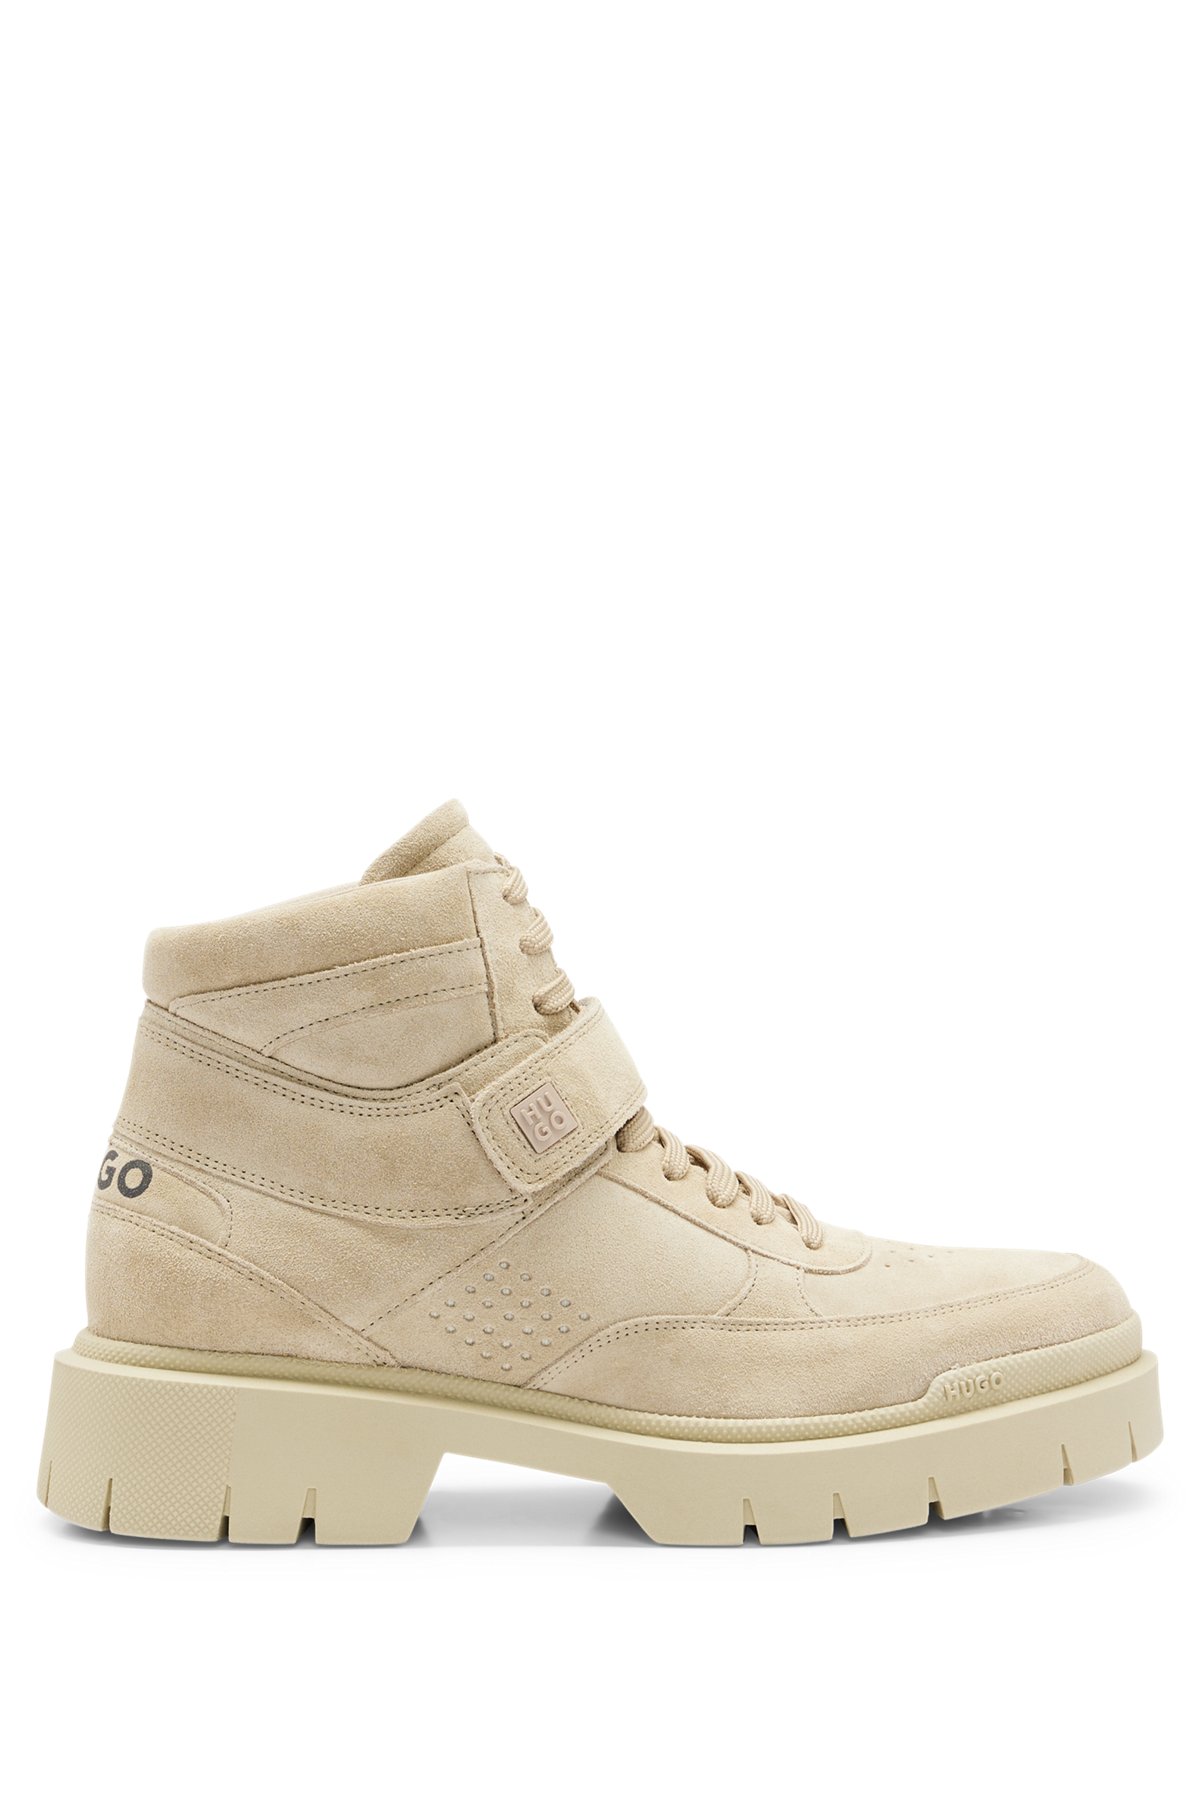 Washed-suede half boots with branded details, Beige